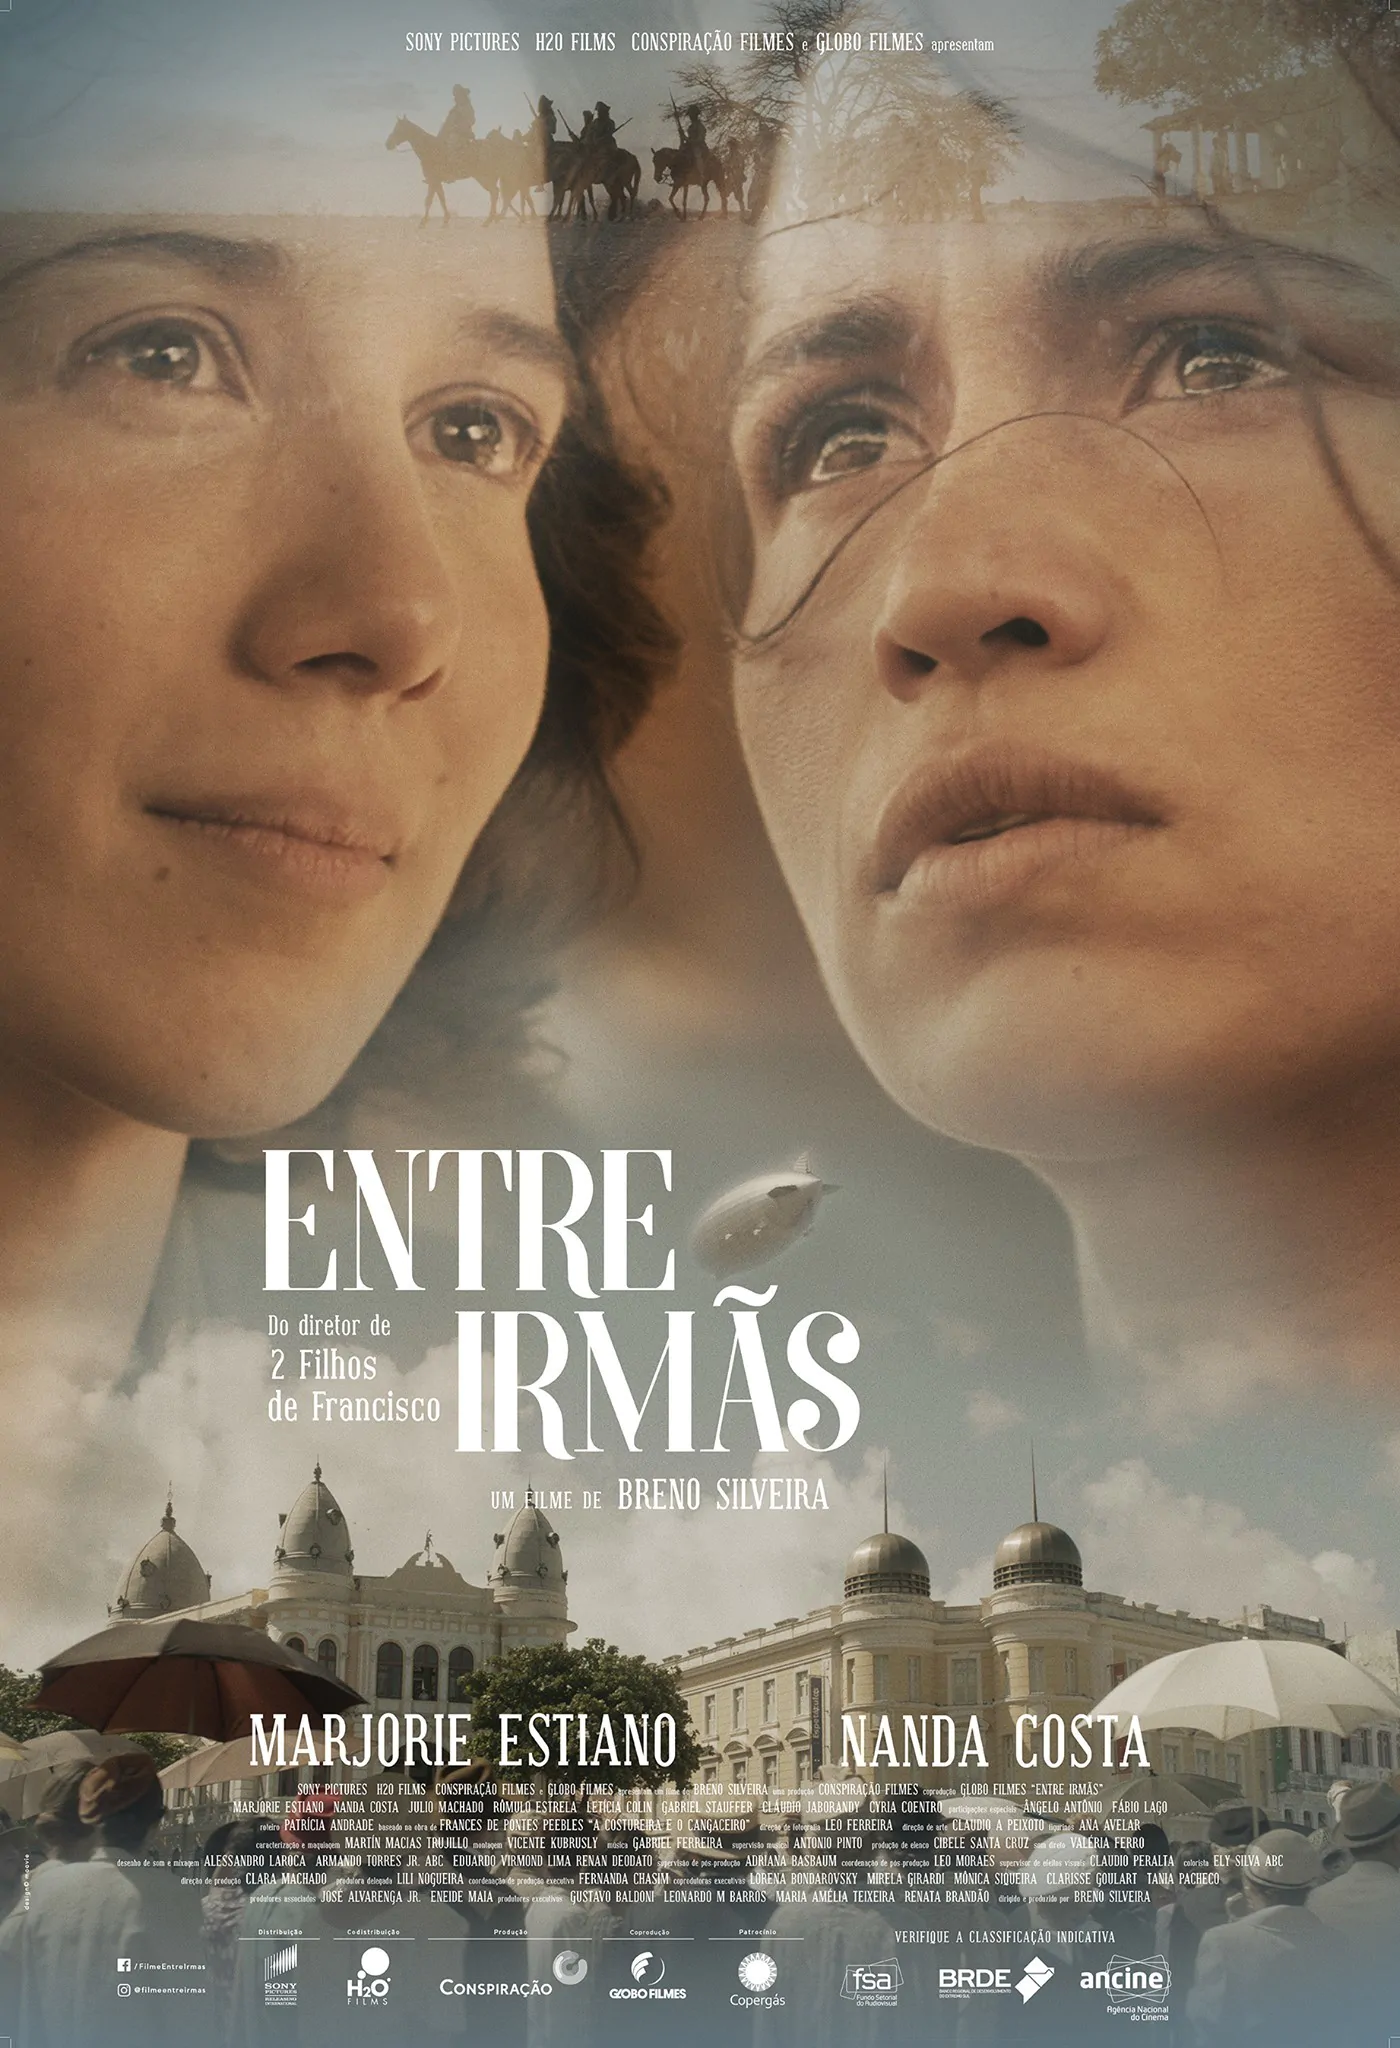 Poster for the movie "Entre Irmãs"